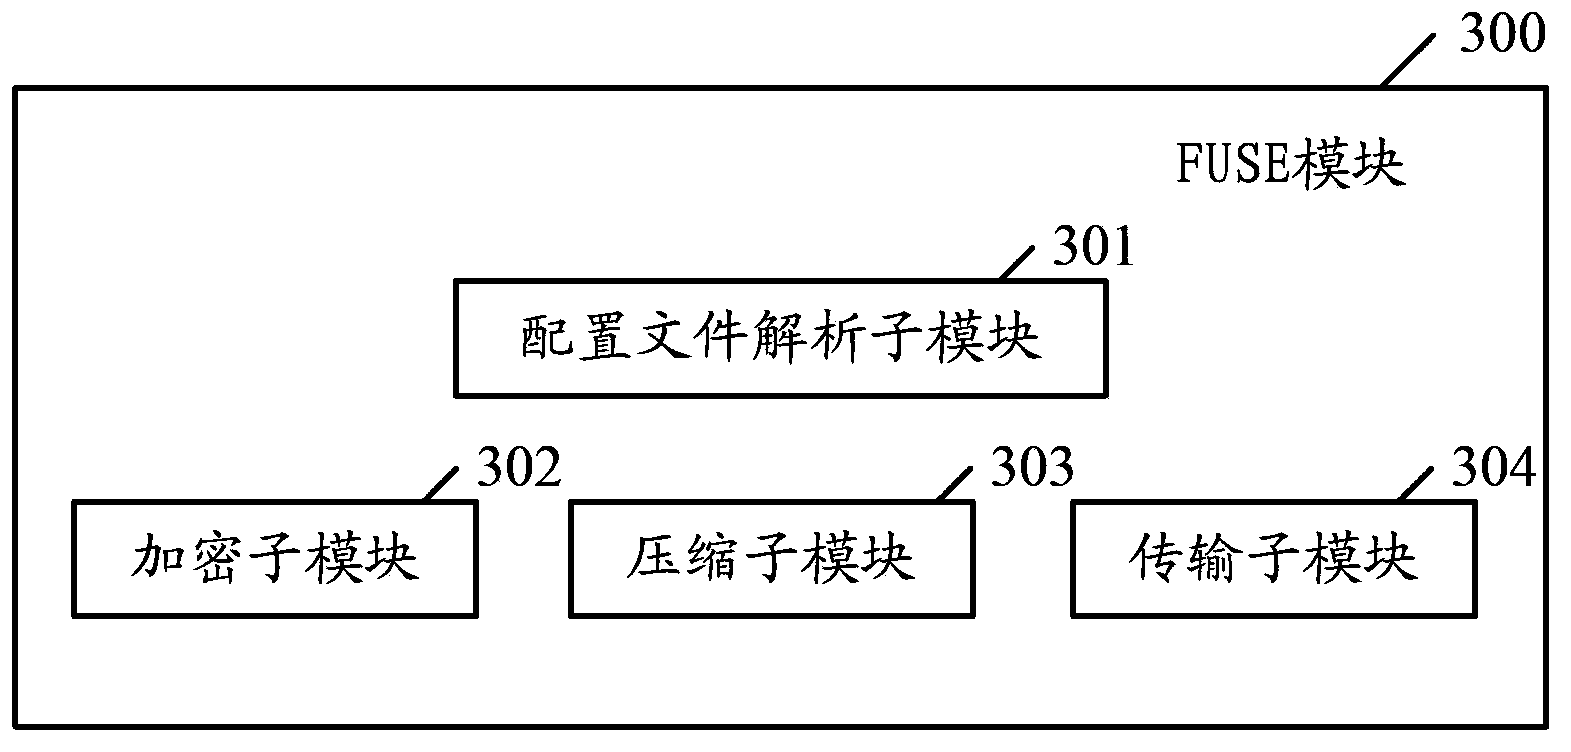 File processing method and device